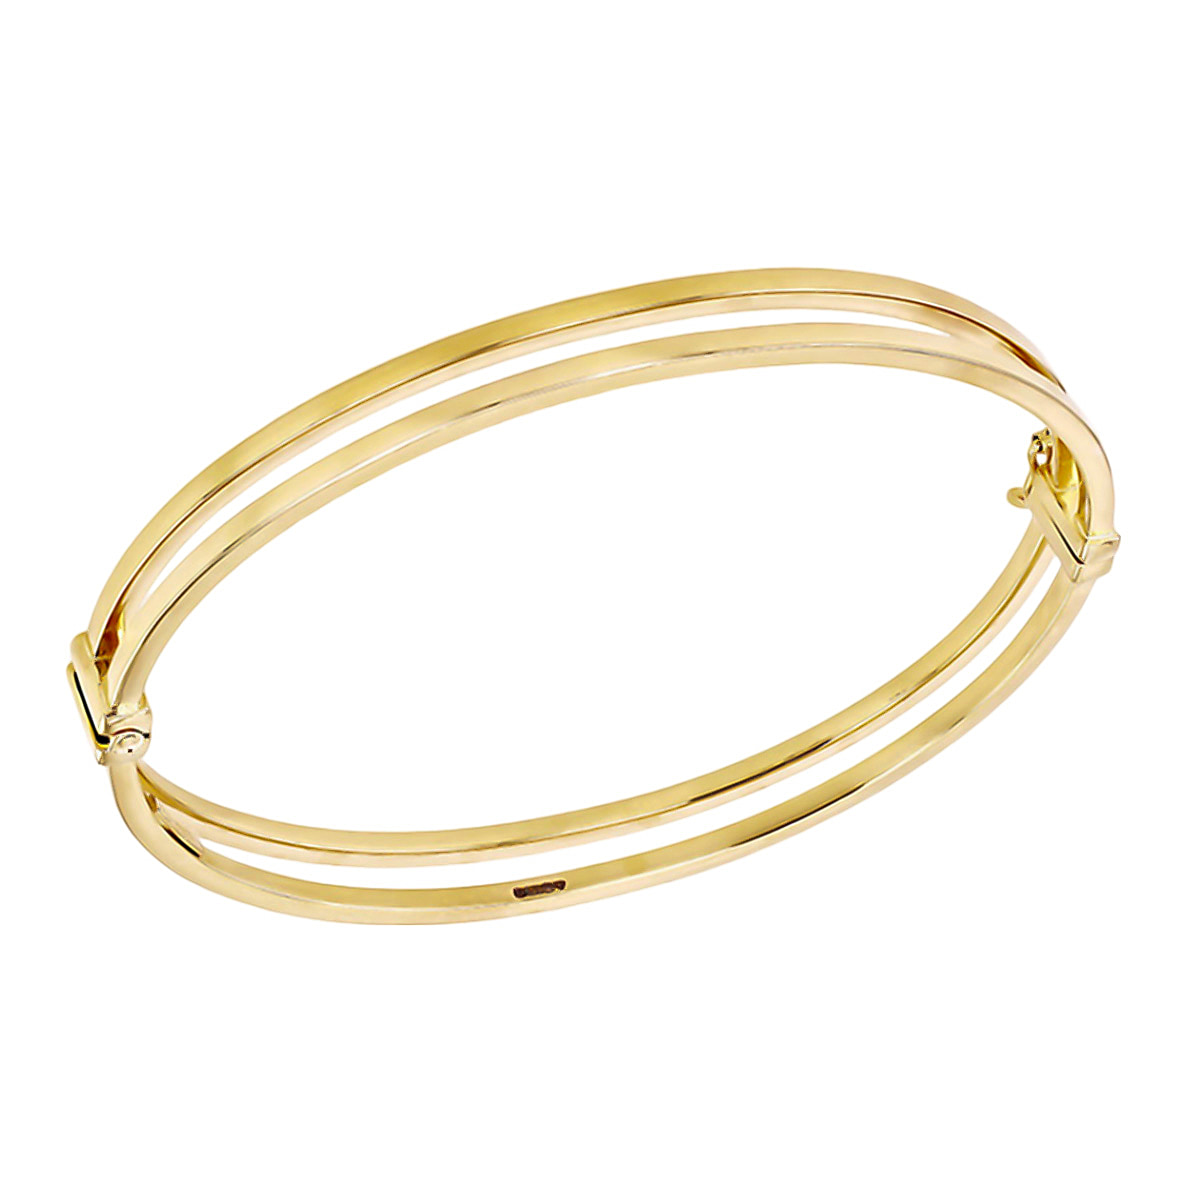 9K Yellow Gold Double Square Tube Bangle, Gold Wt. 4.80 Gm